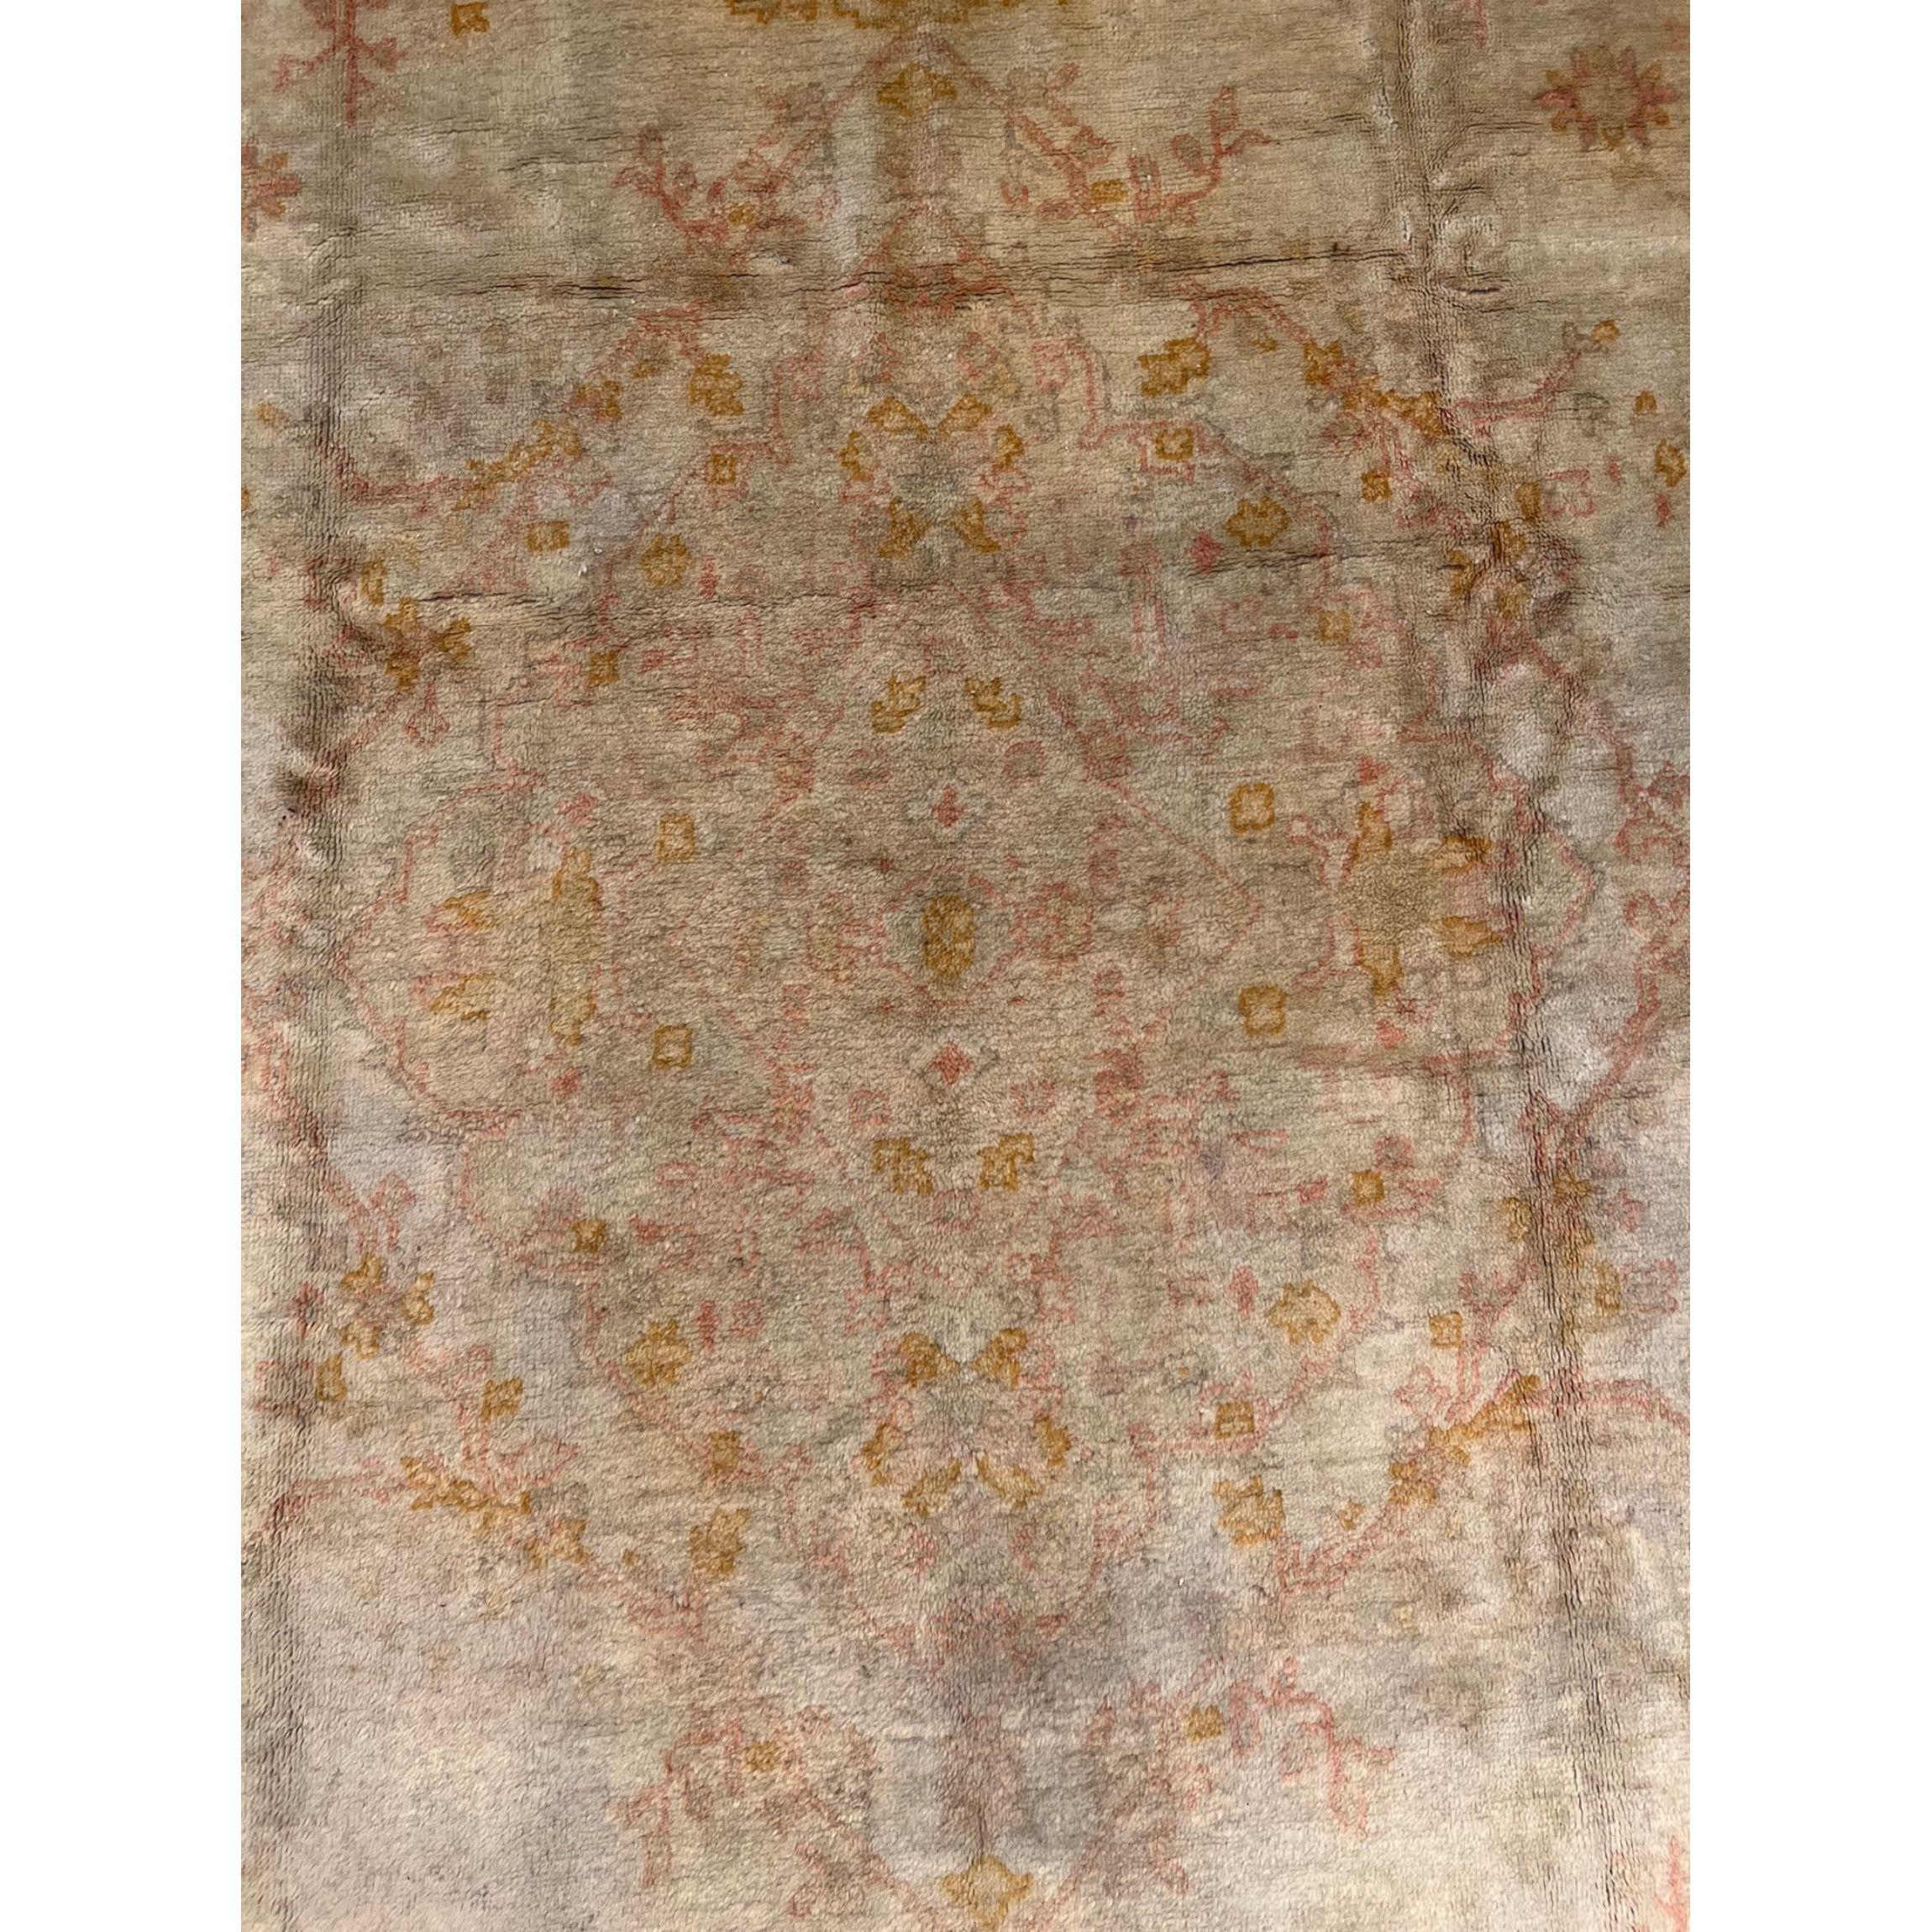 Antique Oushak Rug 13.0x9.3 In Good Condition For Sale In Los Angeles, US